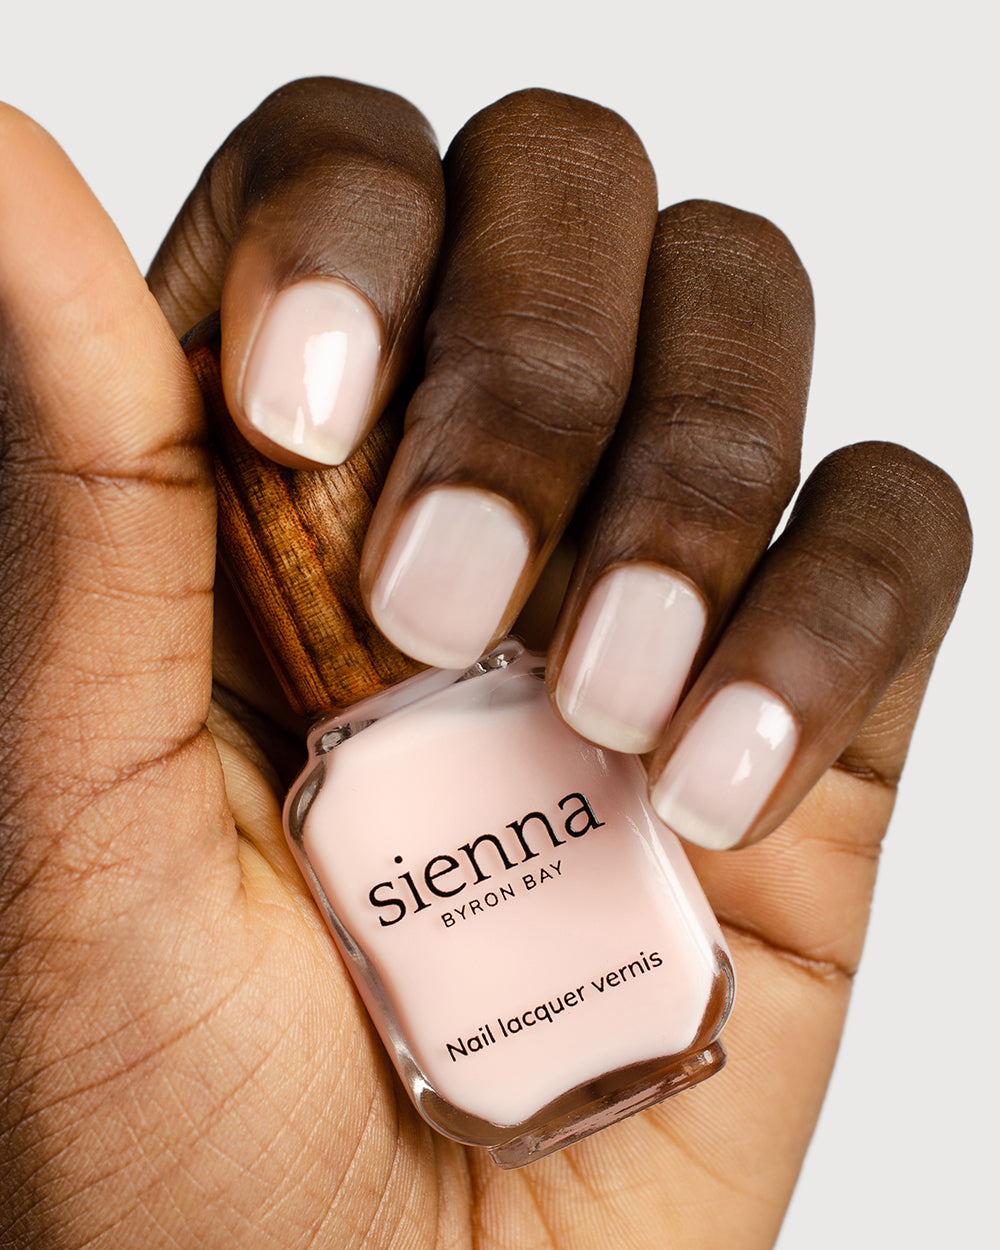 Fall Nail Colors That Look Gorgeous on Dark Skin | The Everygirl